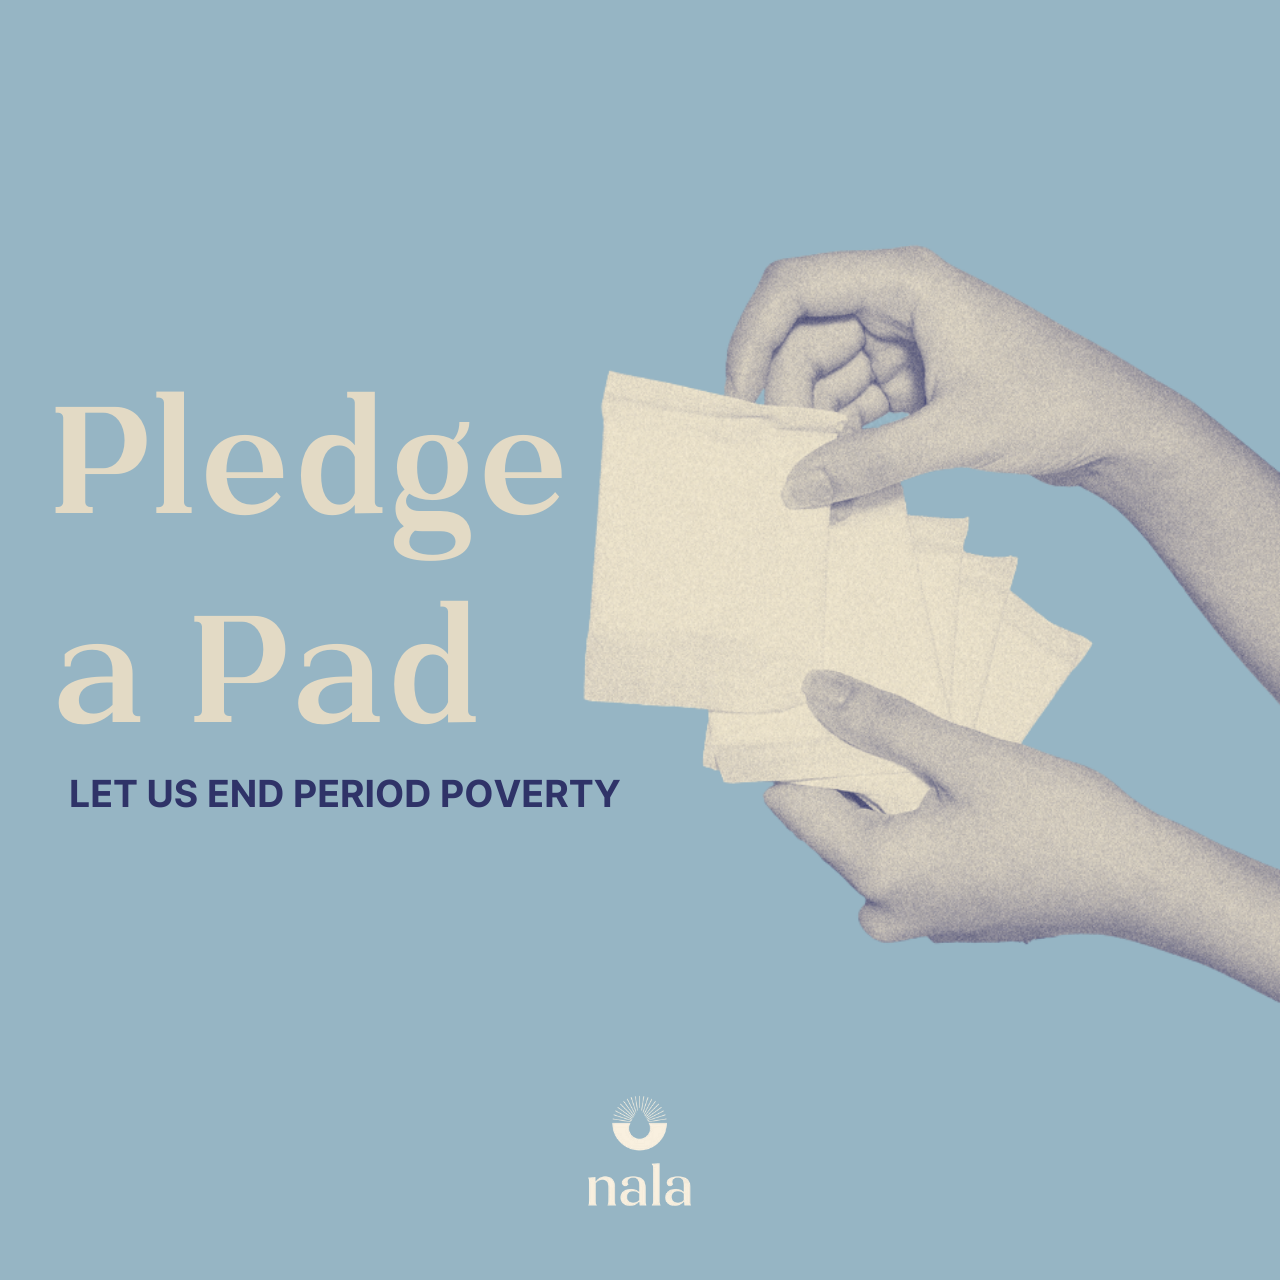 Pledge a Pad: Let’s end Period Poverty by Pledging A Pad 💜